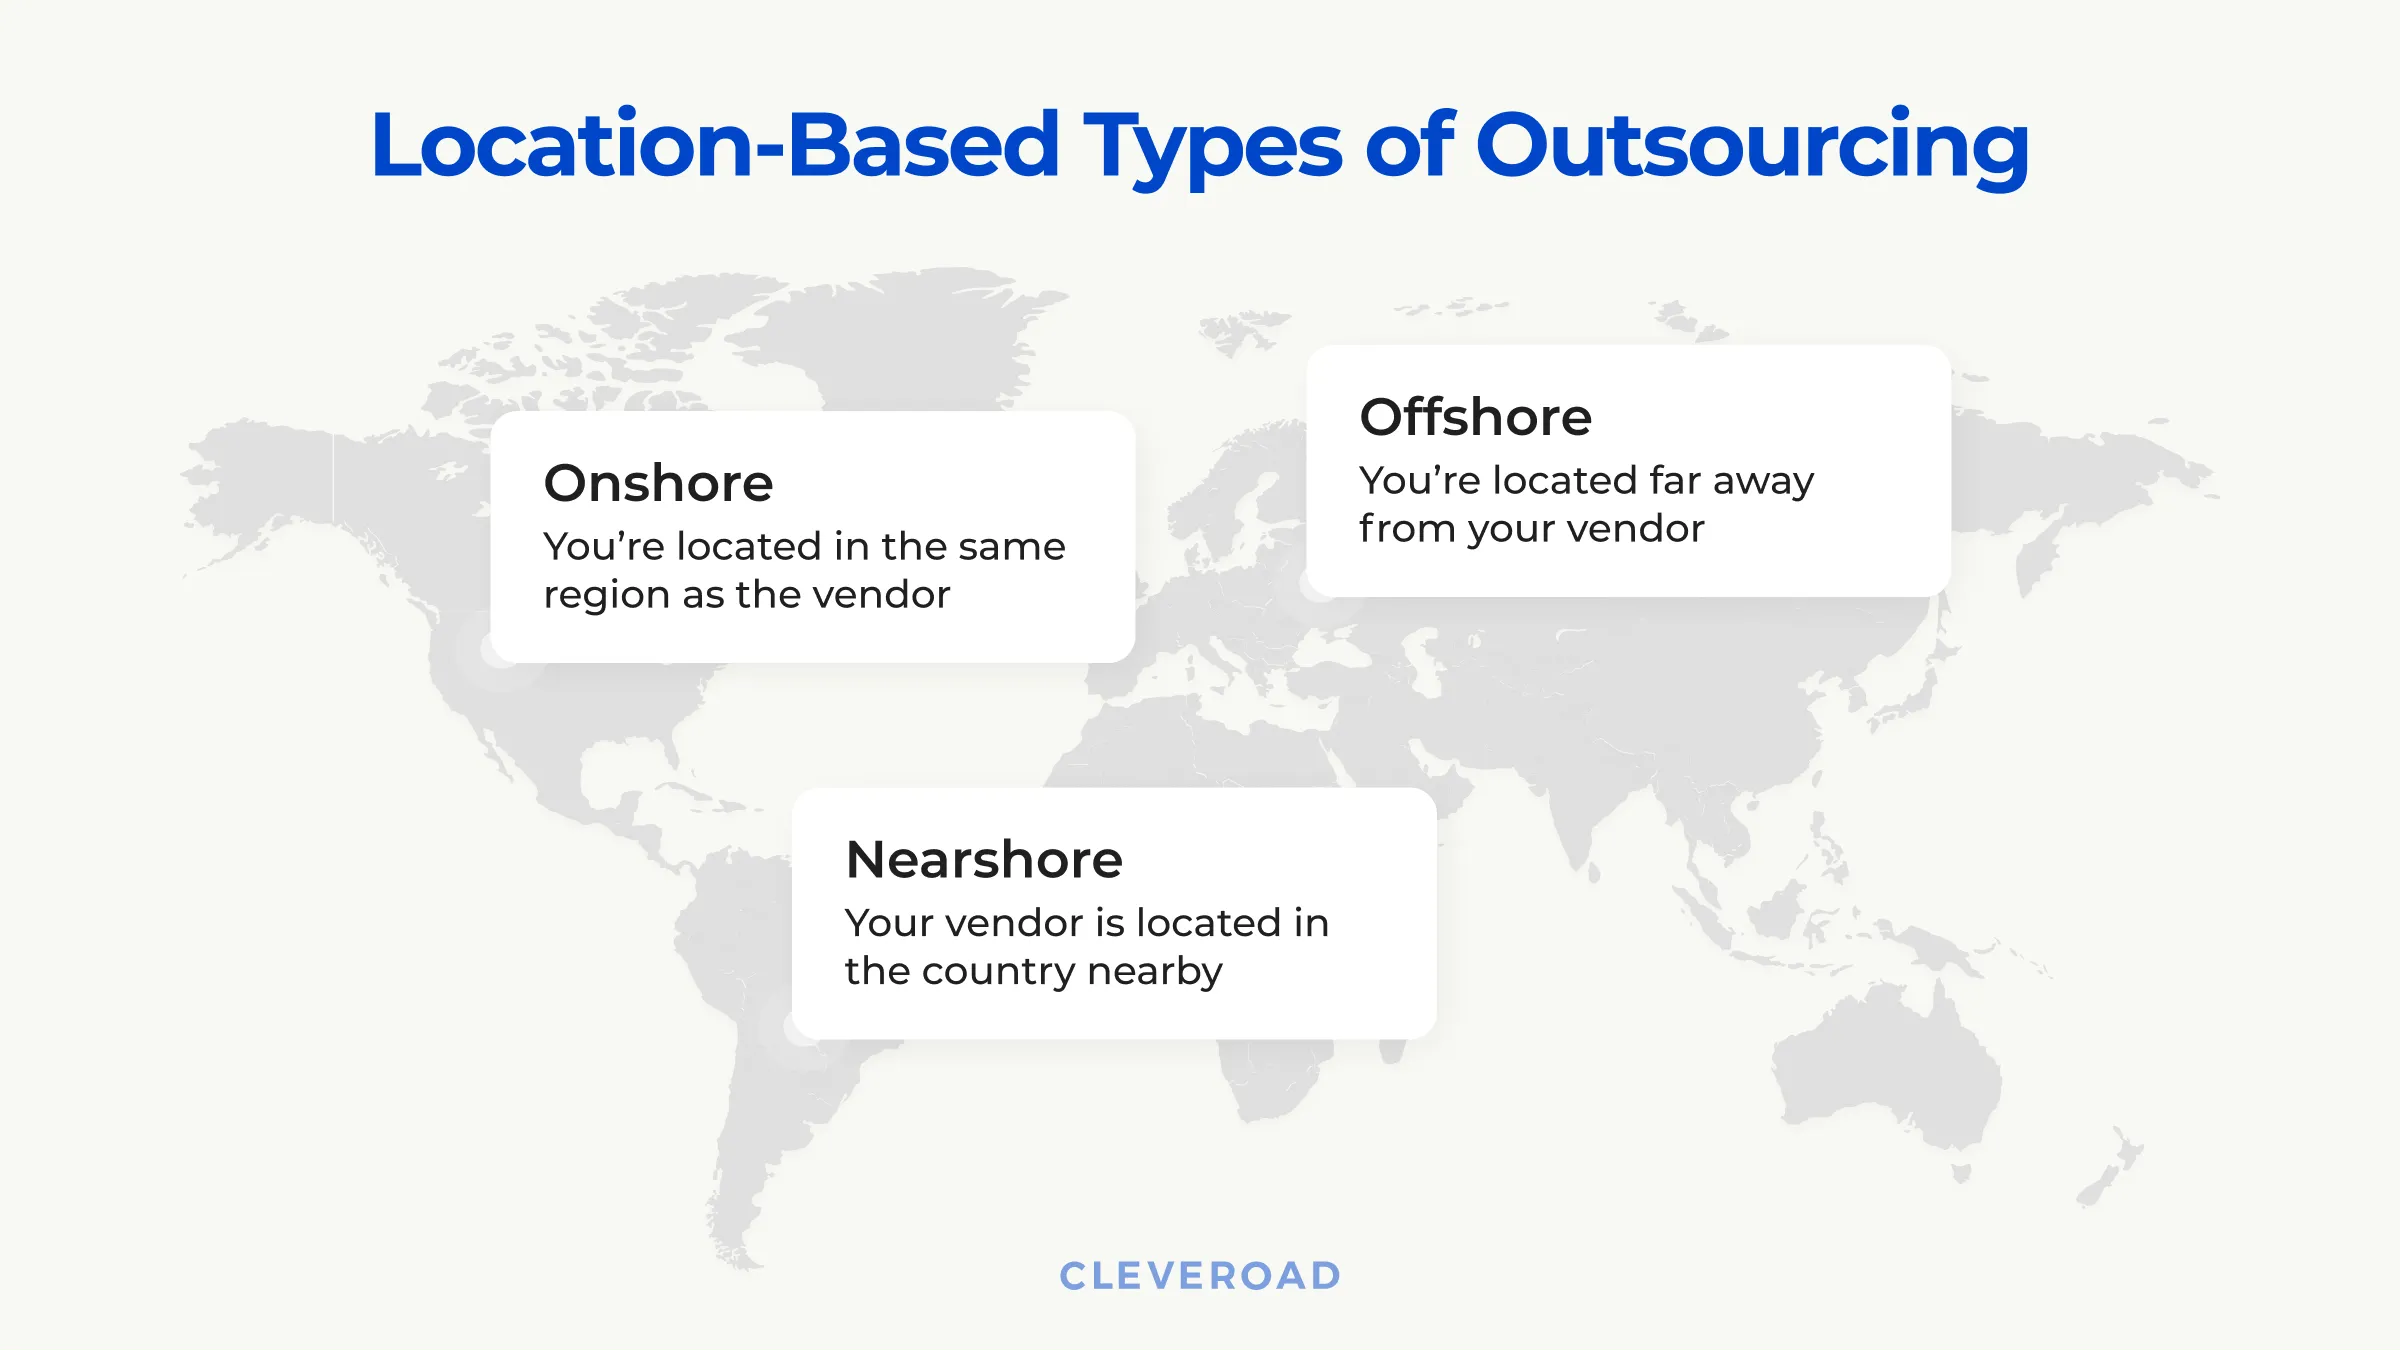 Location-based types of outsourcing